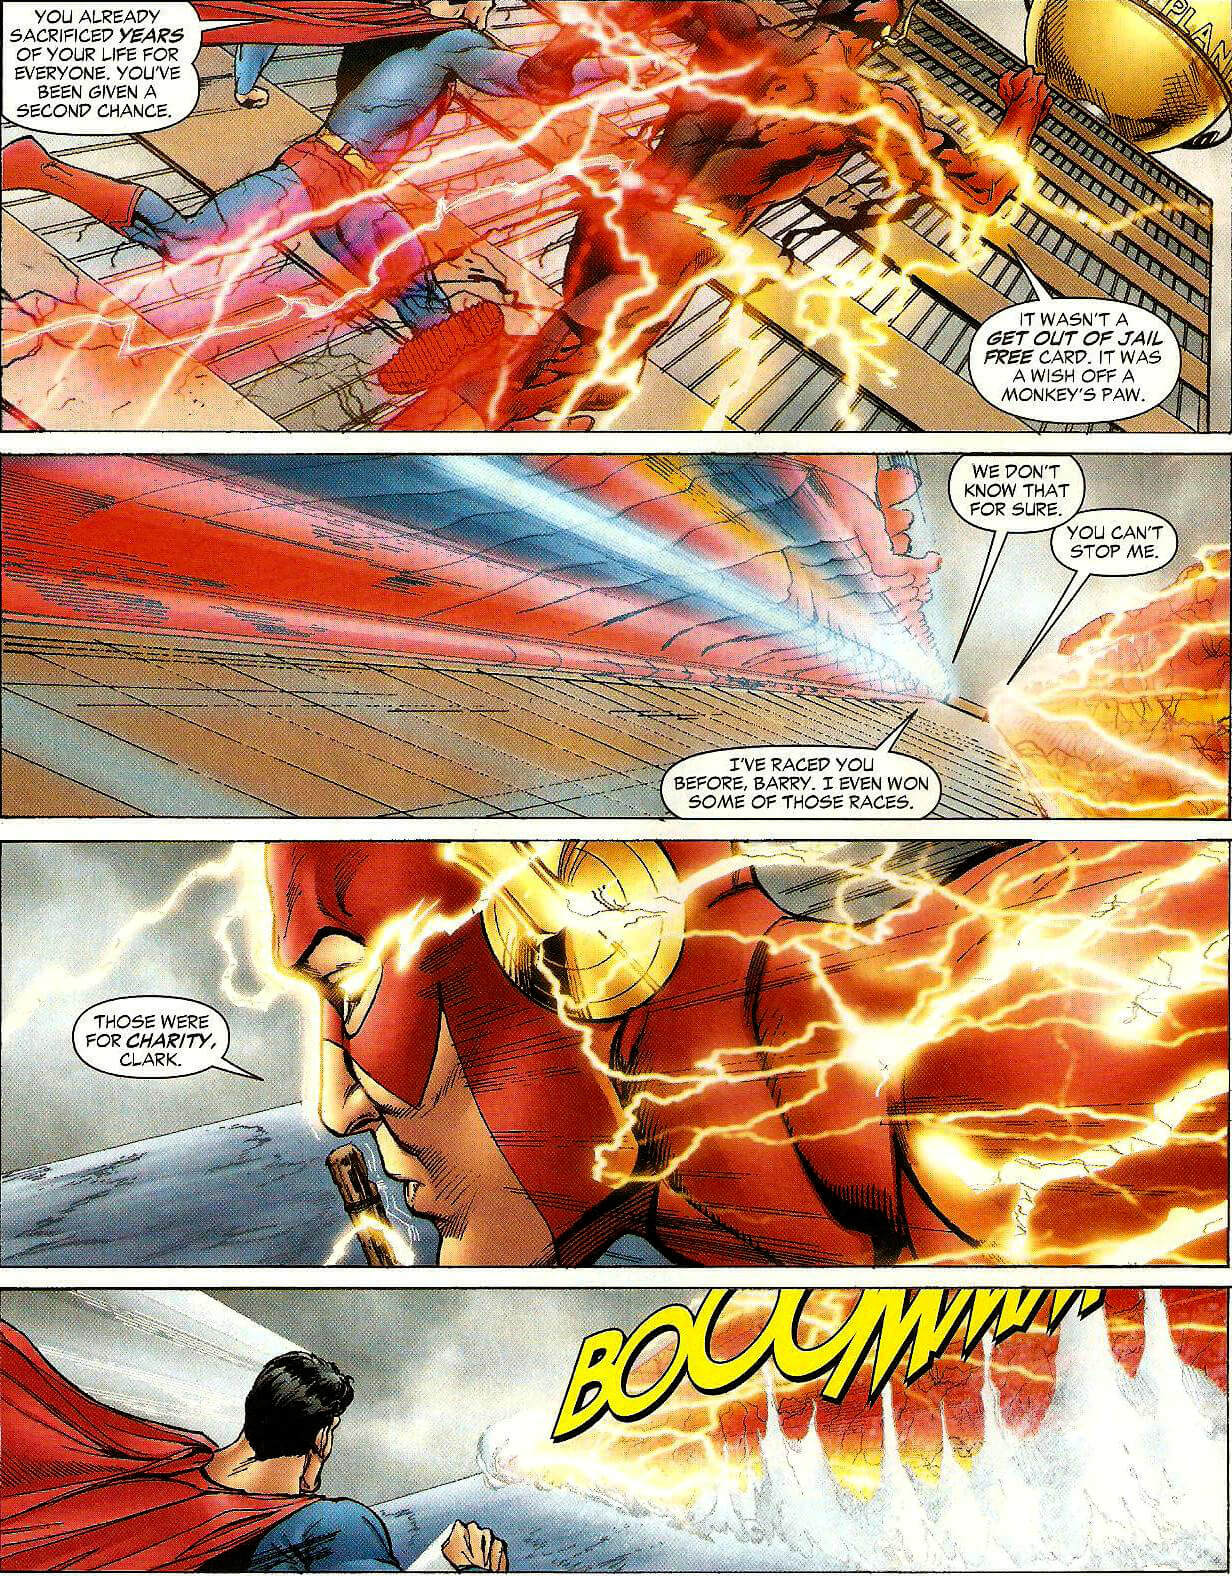 the Flash, feats of speed, 